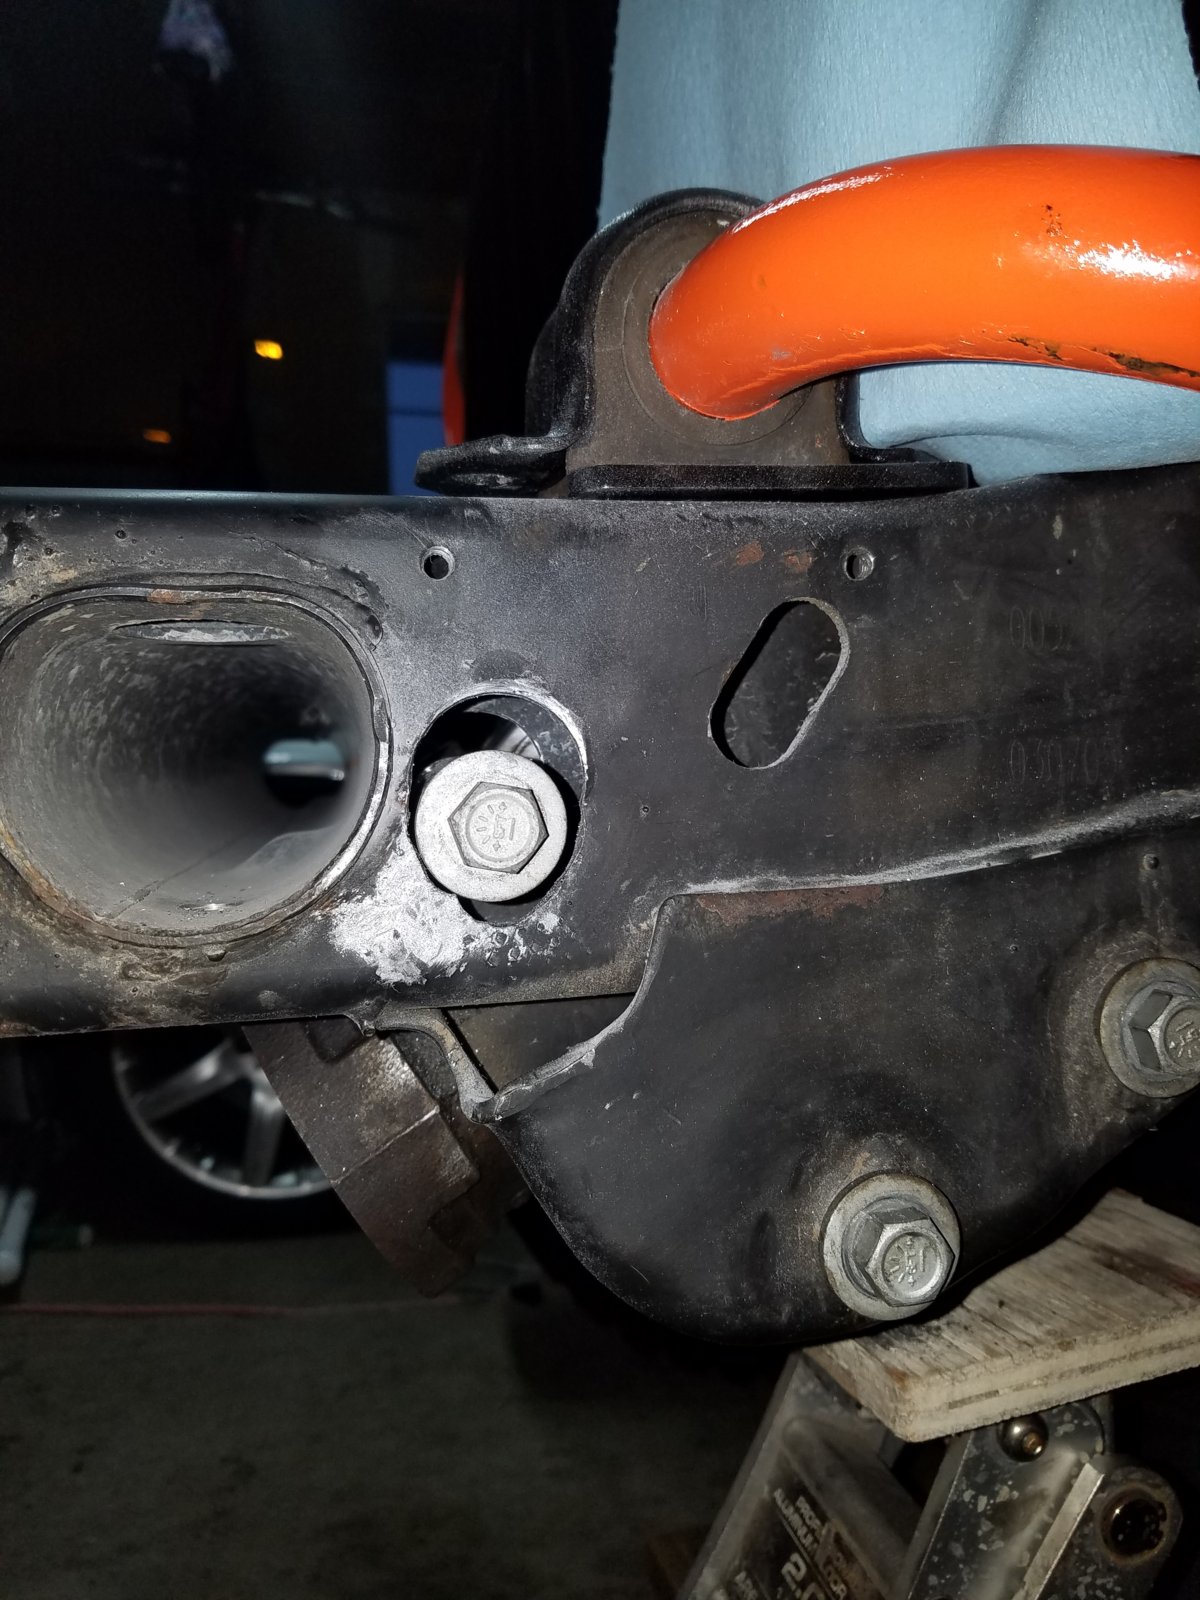 How to install 97-02 steering gearbox in 03-06 TJ / LJ | Jeep Wrangler TJ  Forum